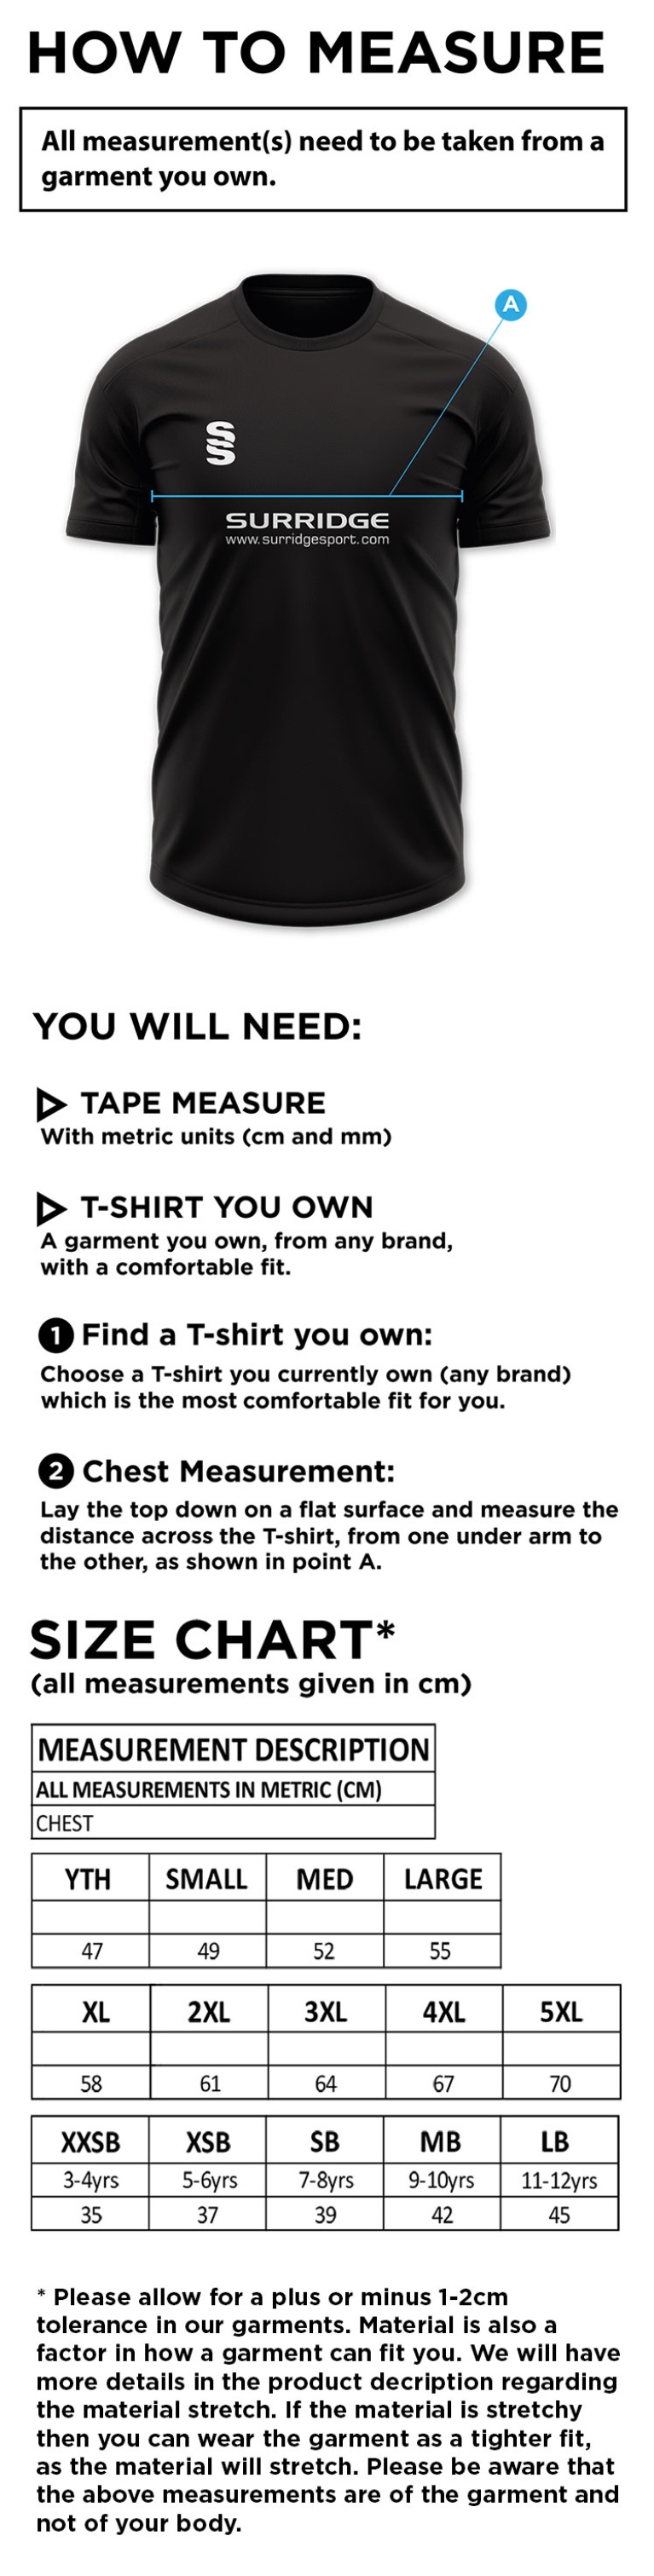 Youth's Dual Games Shirt : Black - Size Guide